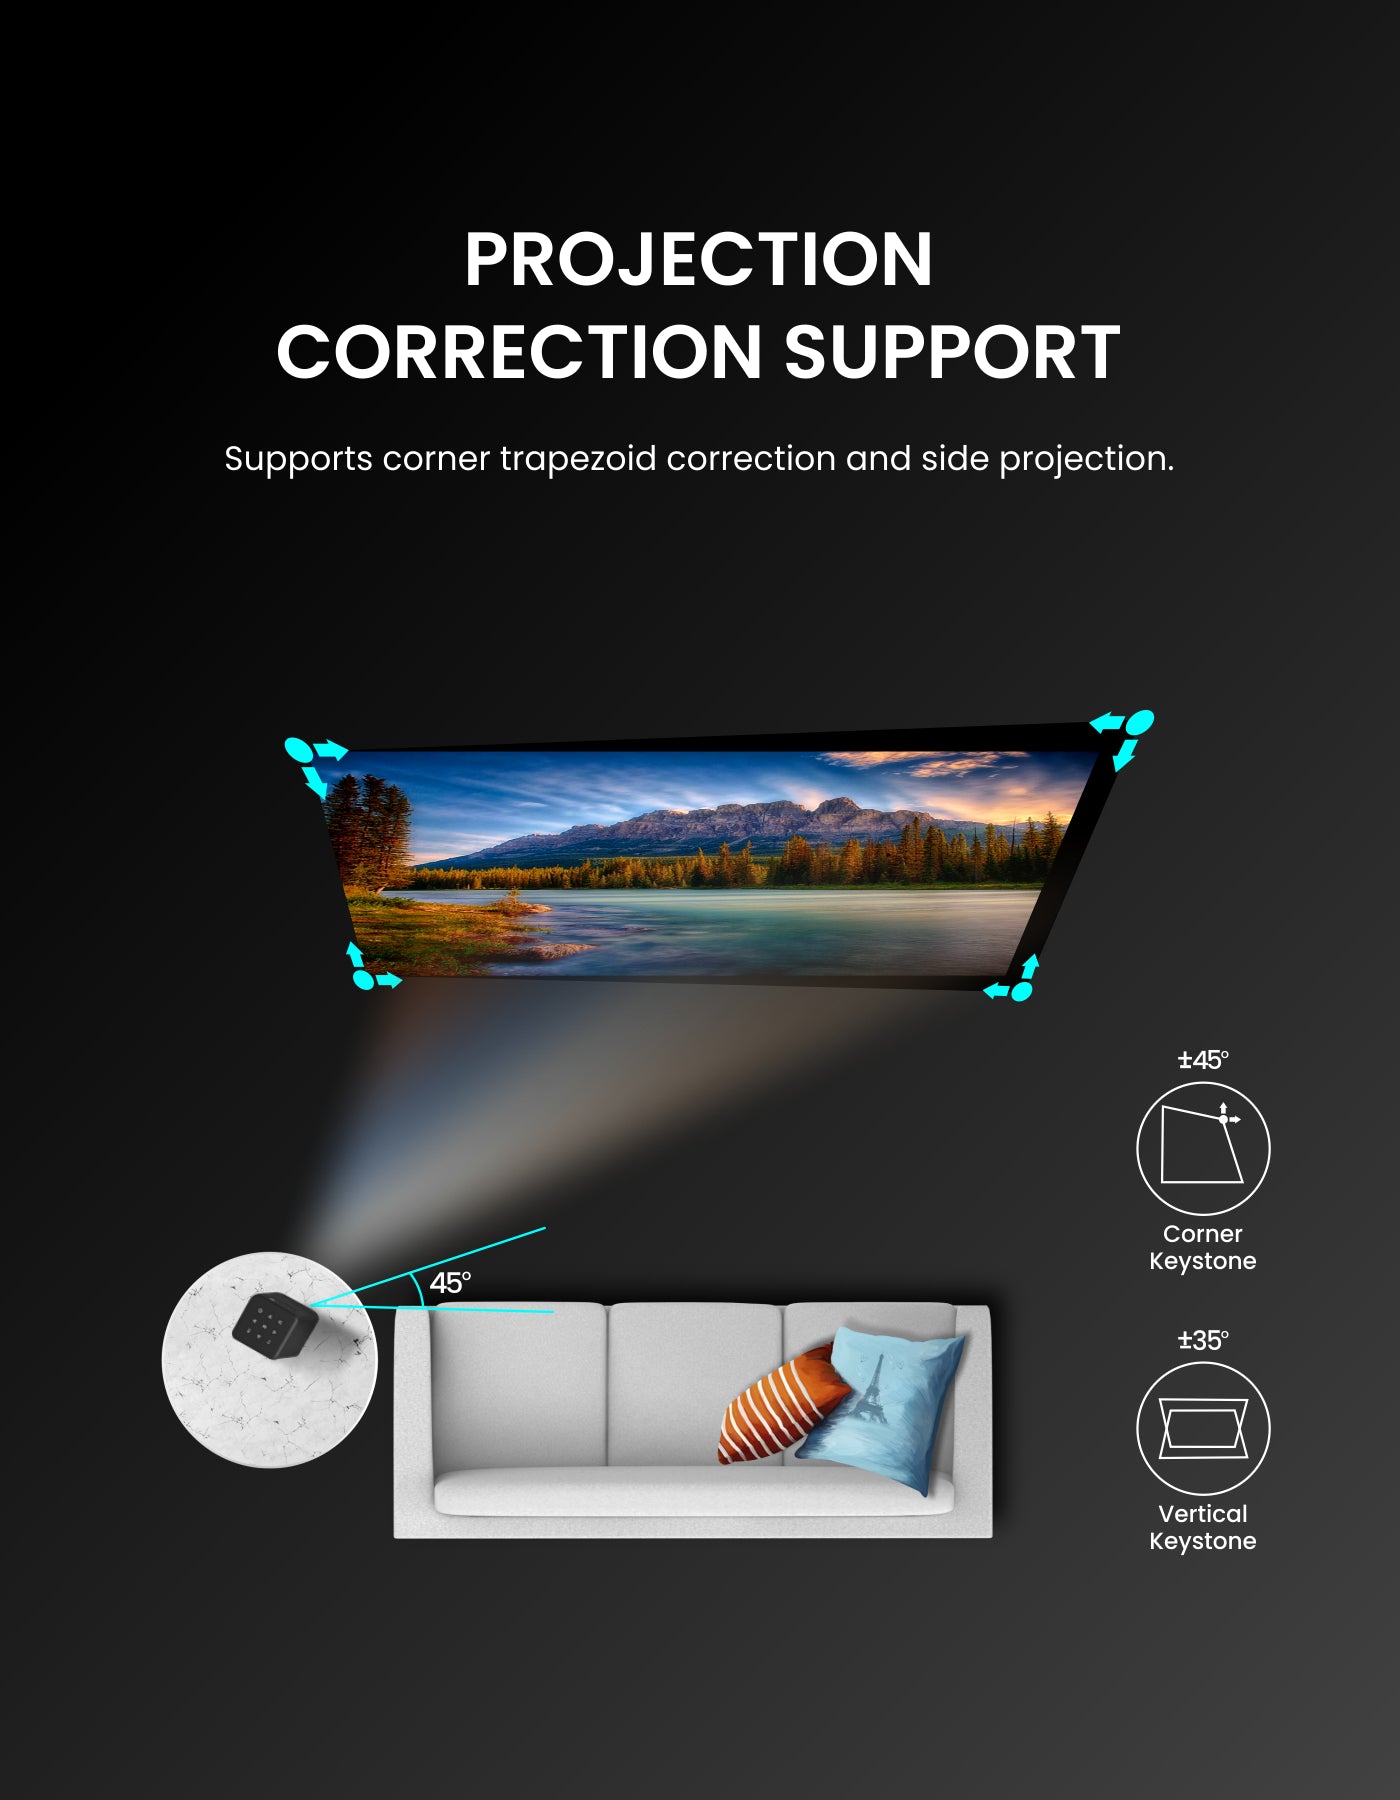 projection correction support in Portronics Pico 11 the portable/smart/ bluetooth projector